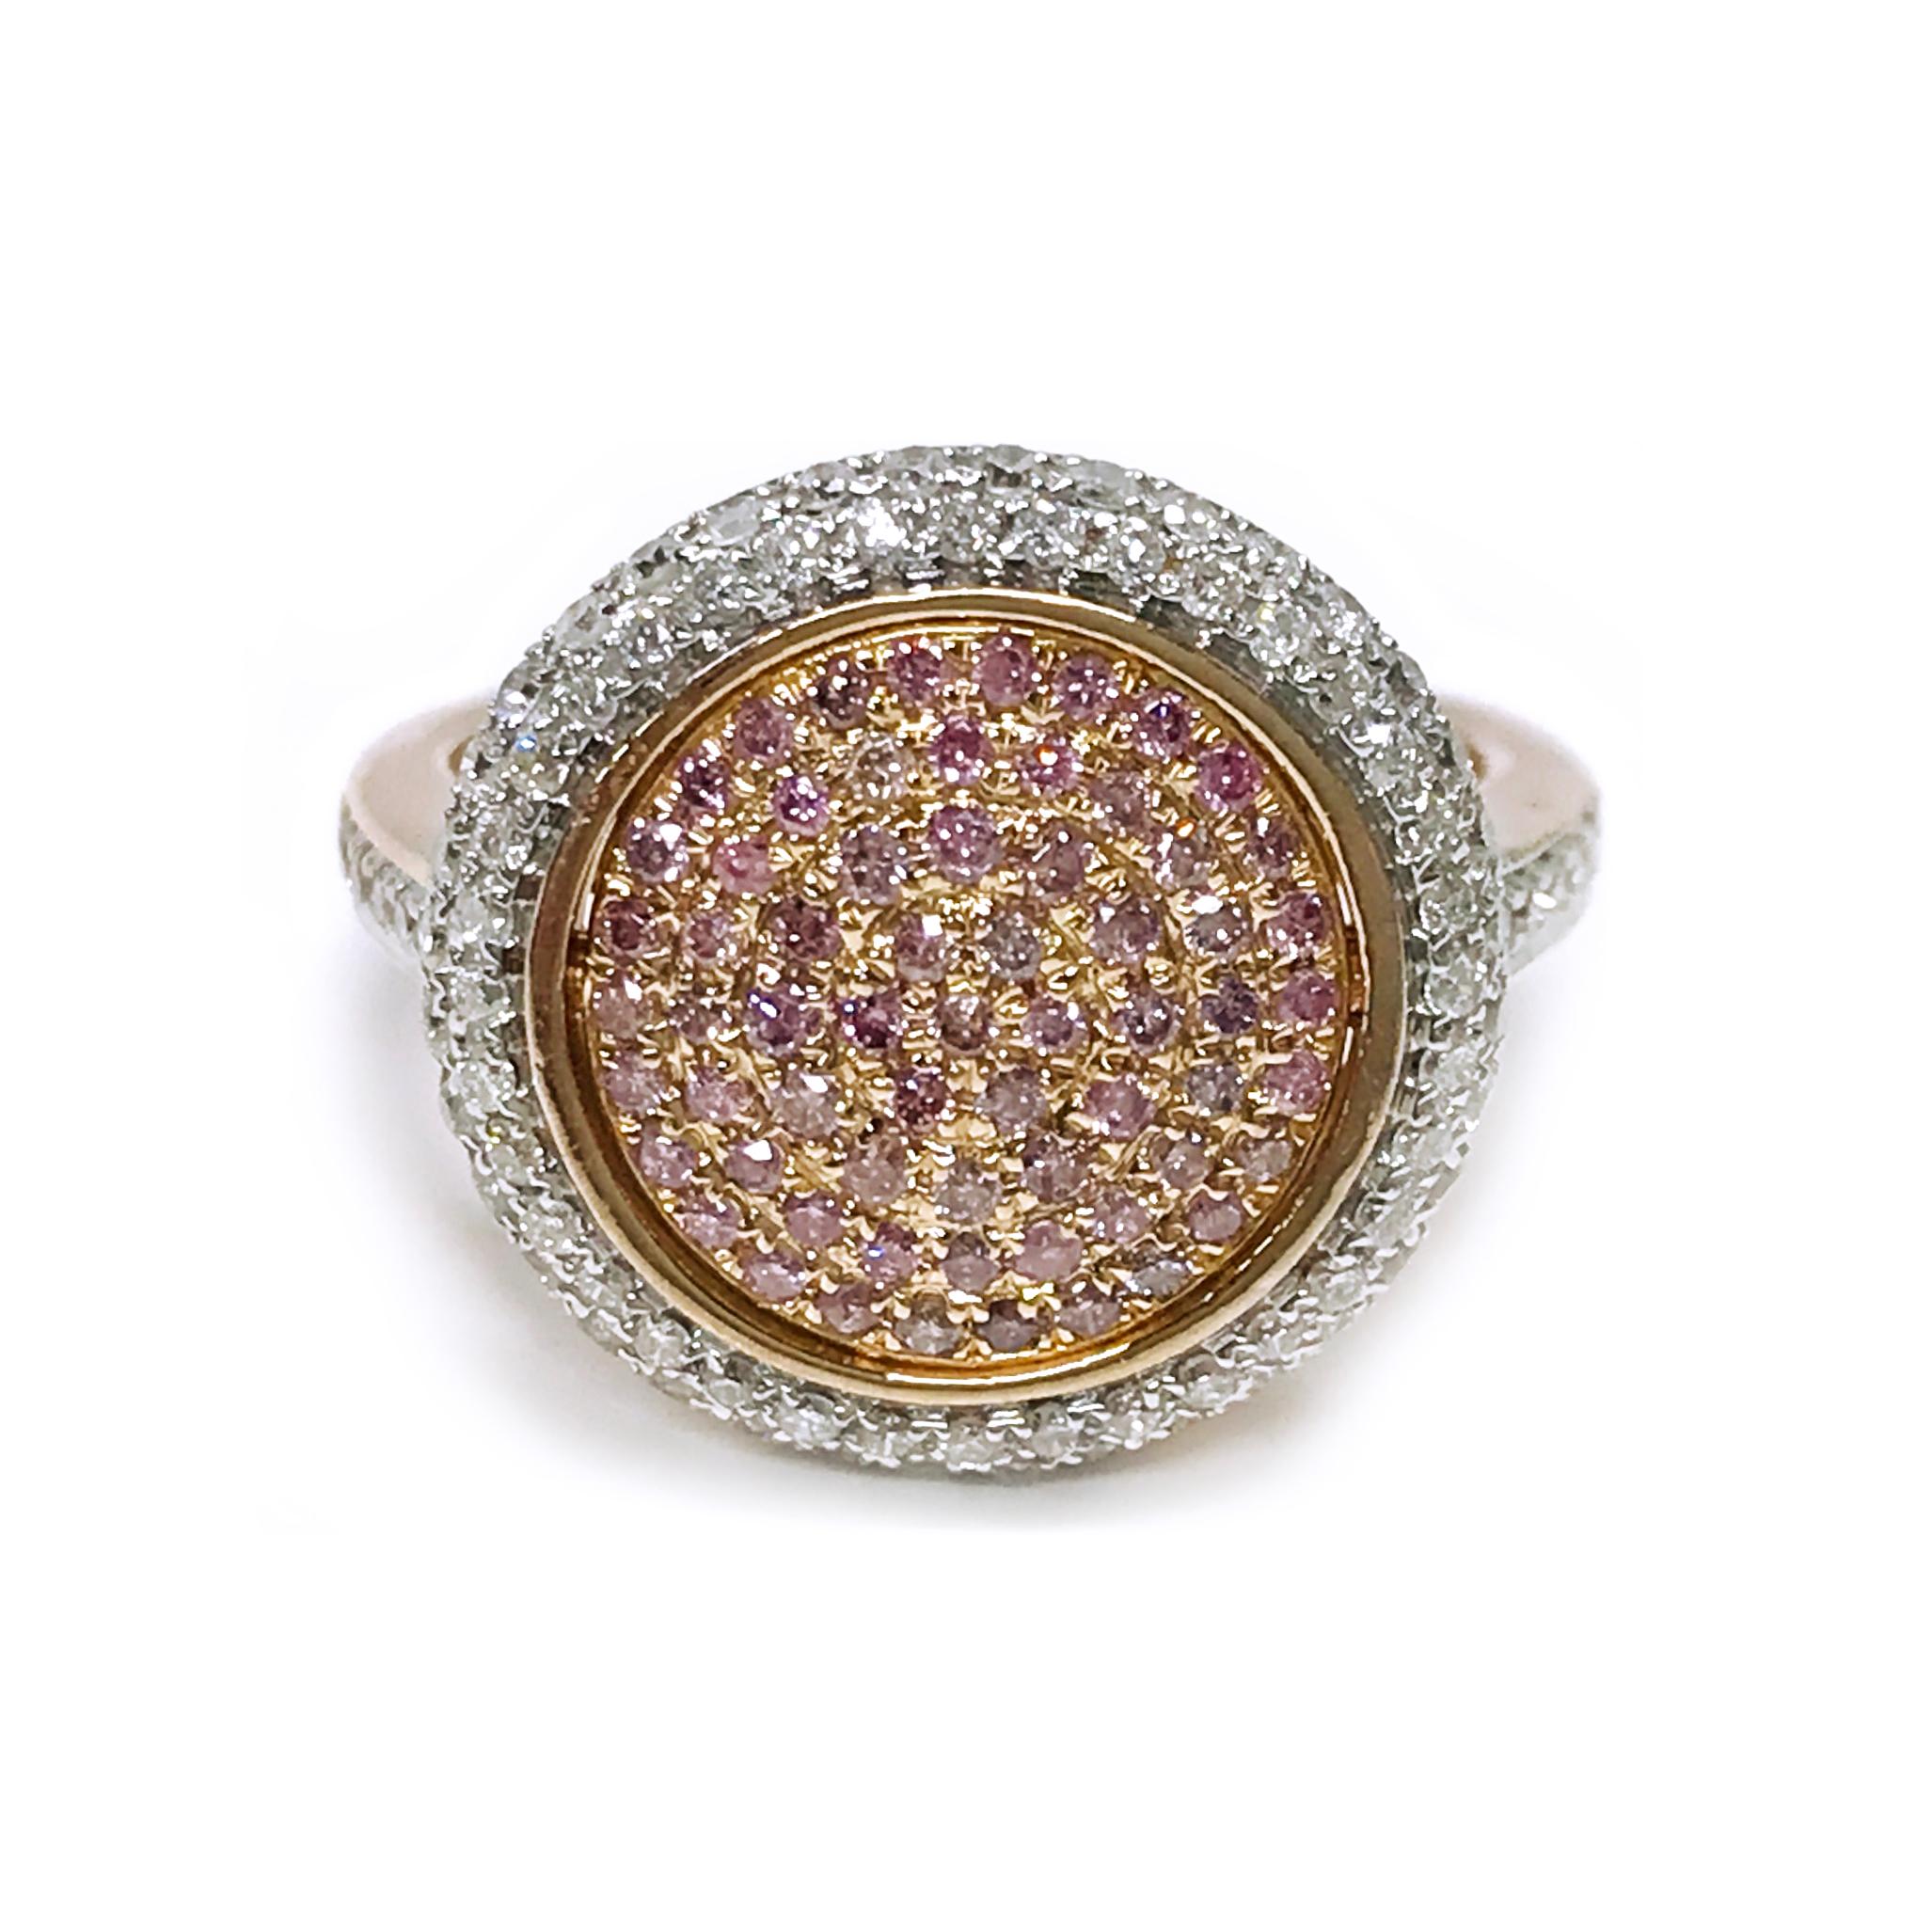 14 Karat Rose Gold Natural Pink Diamond Pavé Ring. This beautiful ring features pink diamonds pave-set in the center of the ring in a dome and a double halo of bead-set white diamonds. There are six side diamonds on each side of the band and the